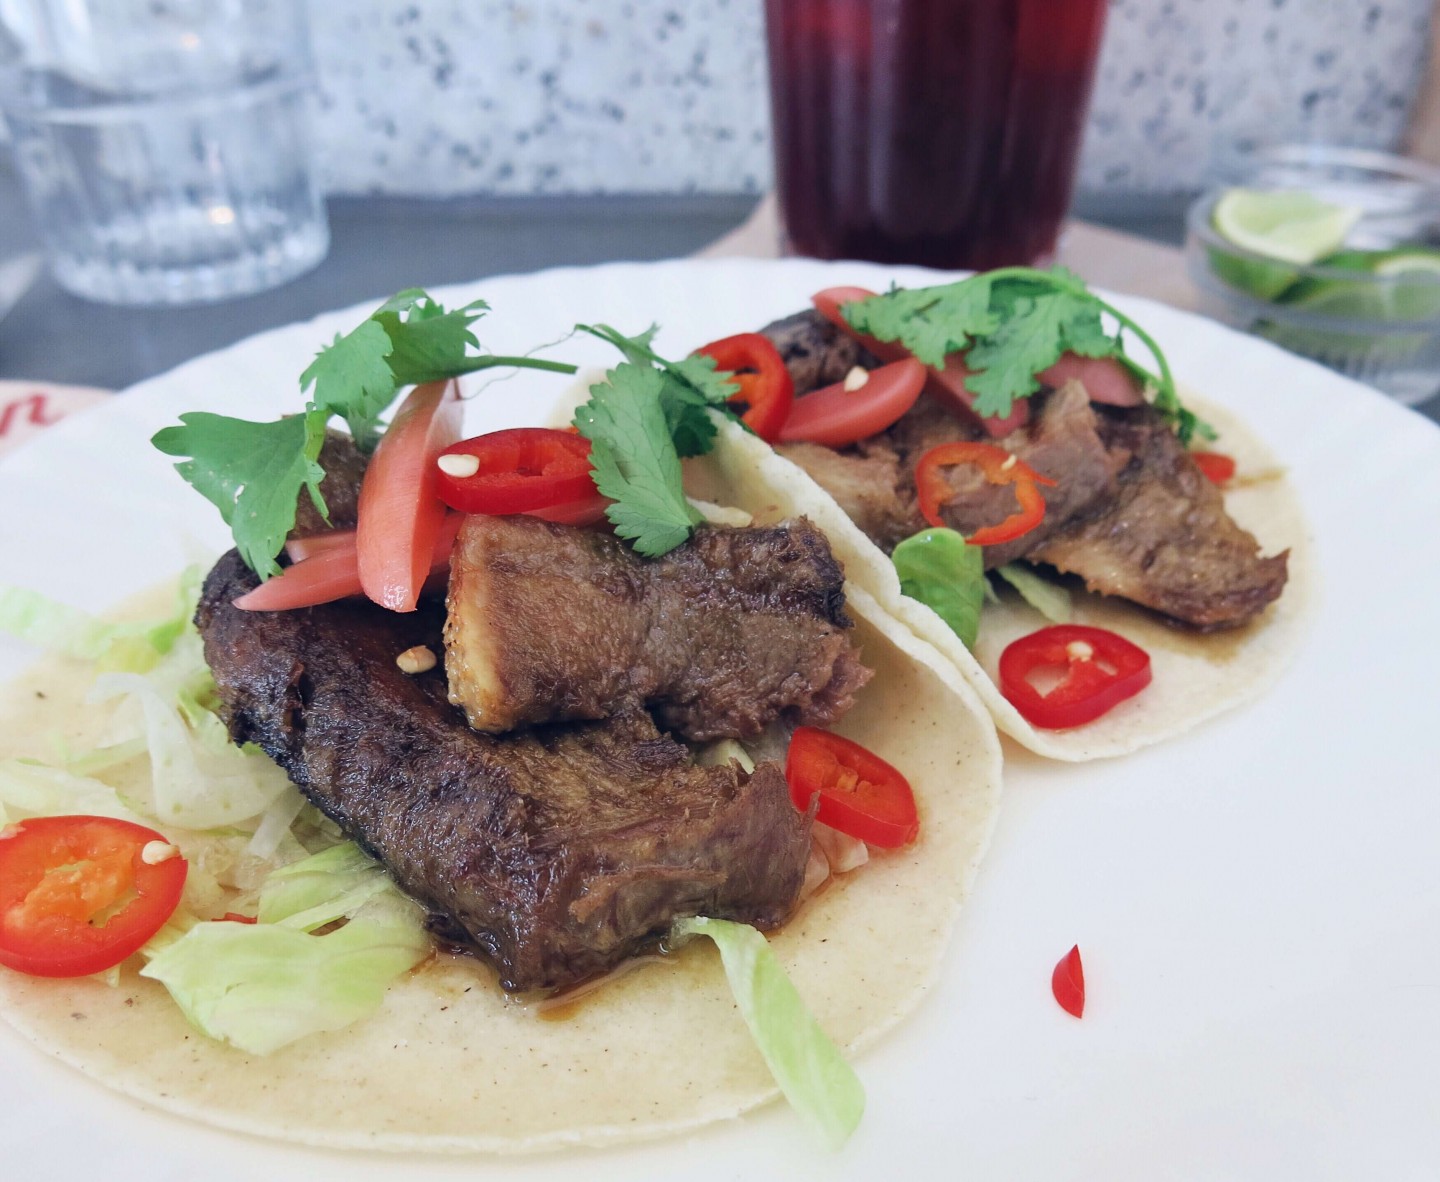 The 12 hour braized ox tongue tacos at Corazon in Soho, London. A great restaurant for lunch under £10.